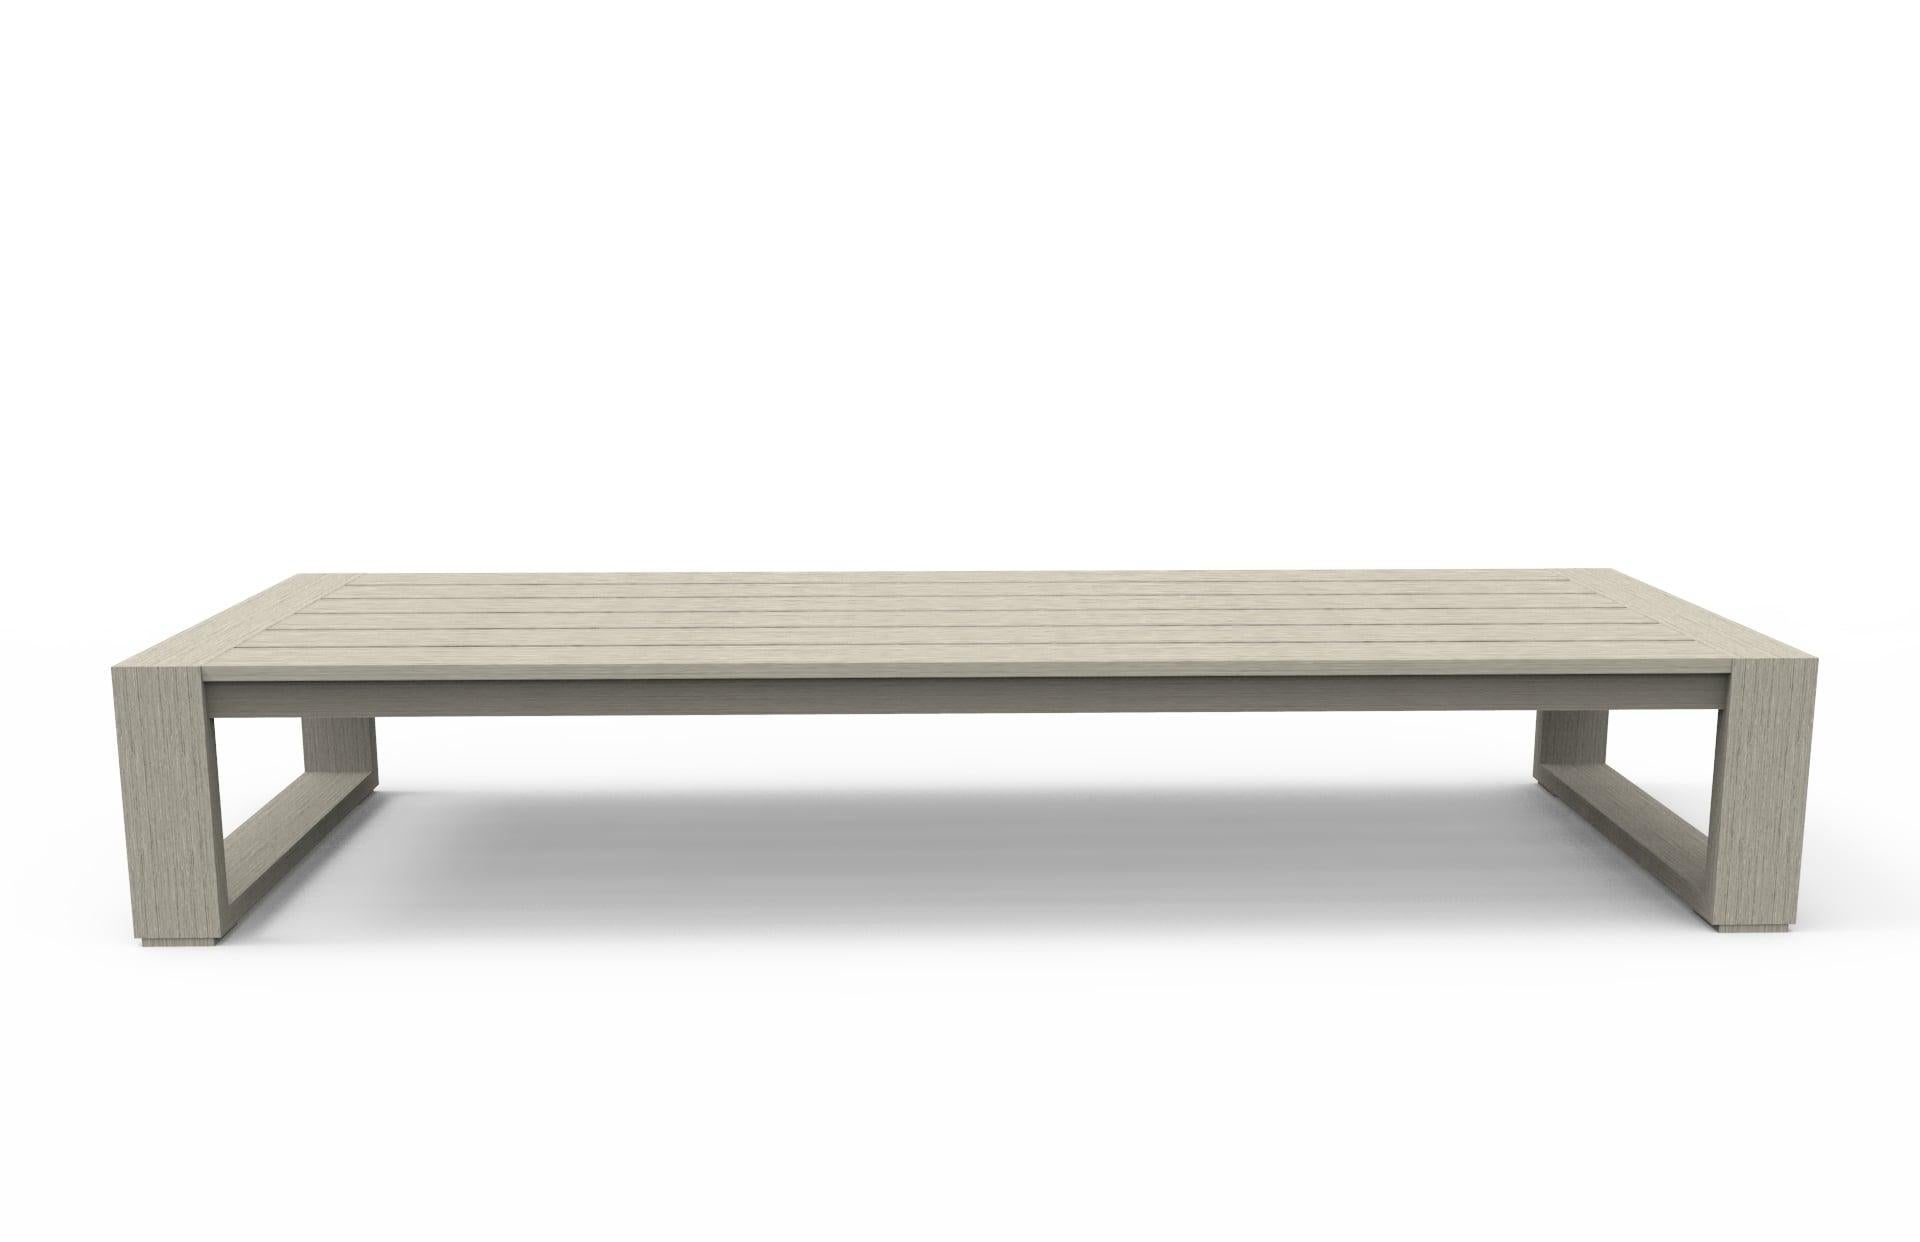 Philippine Brixton Teak Coffee Table 'Grade A' Wire Brushed Weathered Gray For Sale